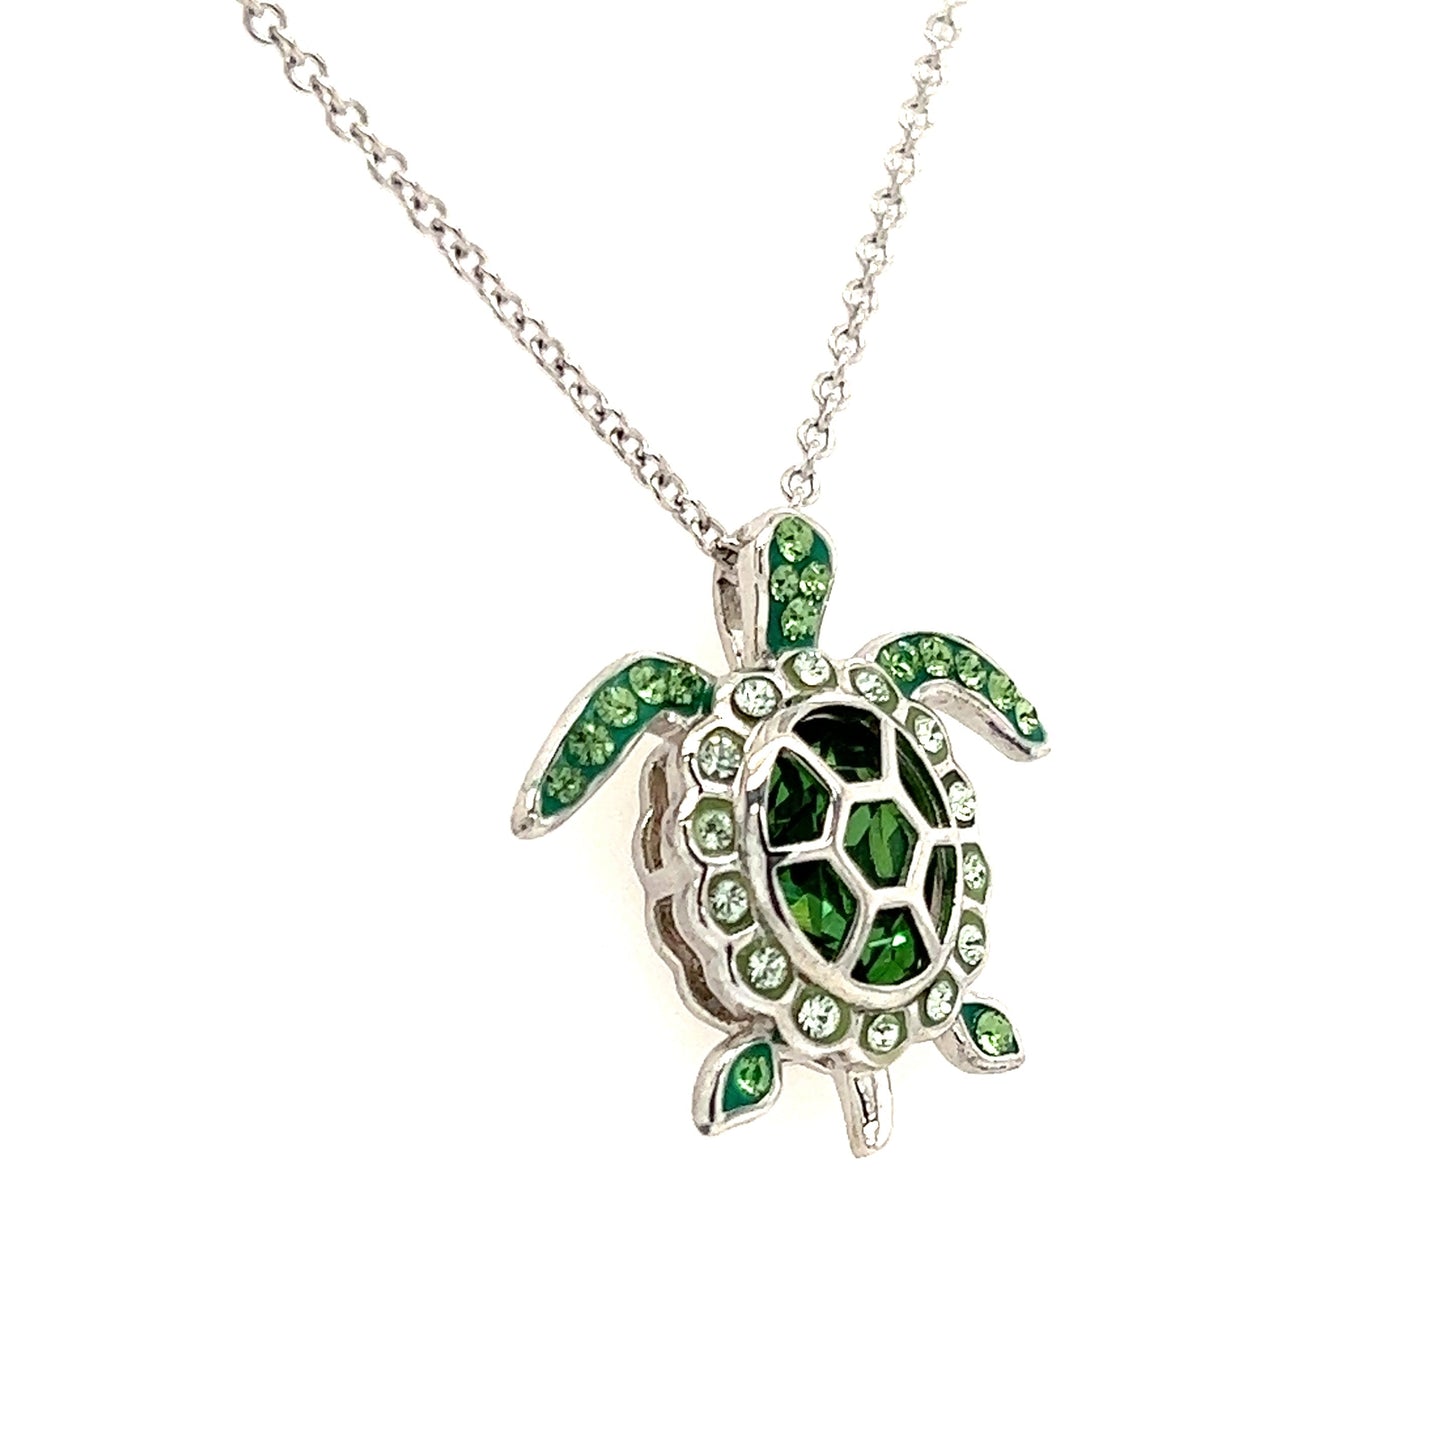 Sea Turtle Necklace with Light Green Crystals in Sterling Silver. Necklace Right Side View